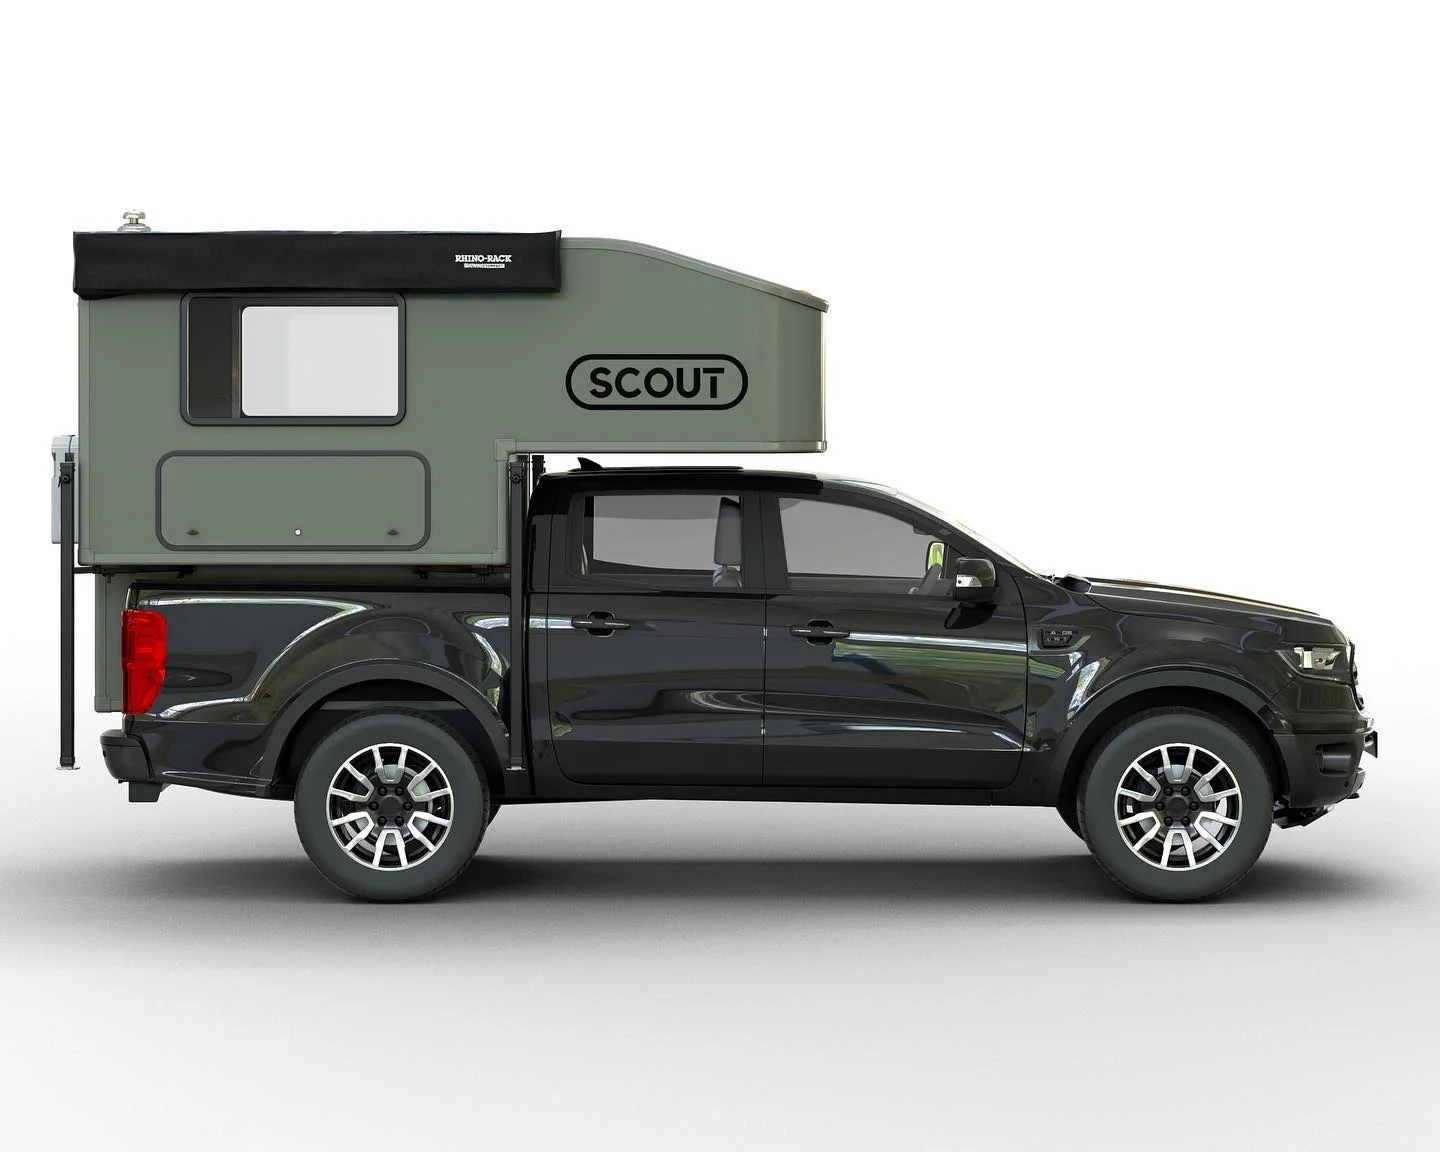 New Scout Yoho Ranger Camper Turns Mid-Size Pickup Into A Small RV